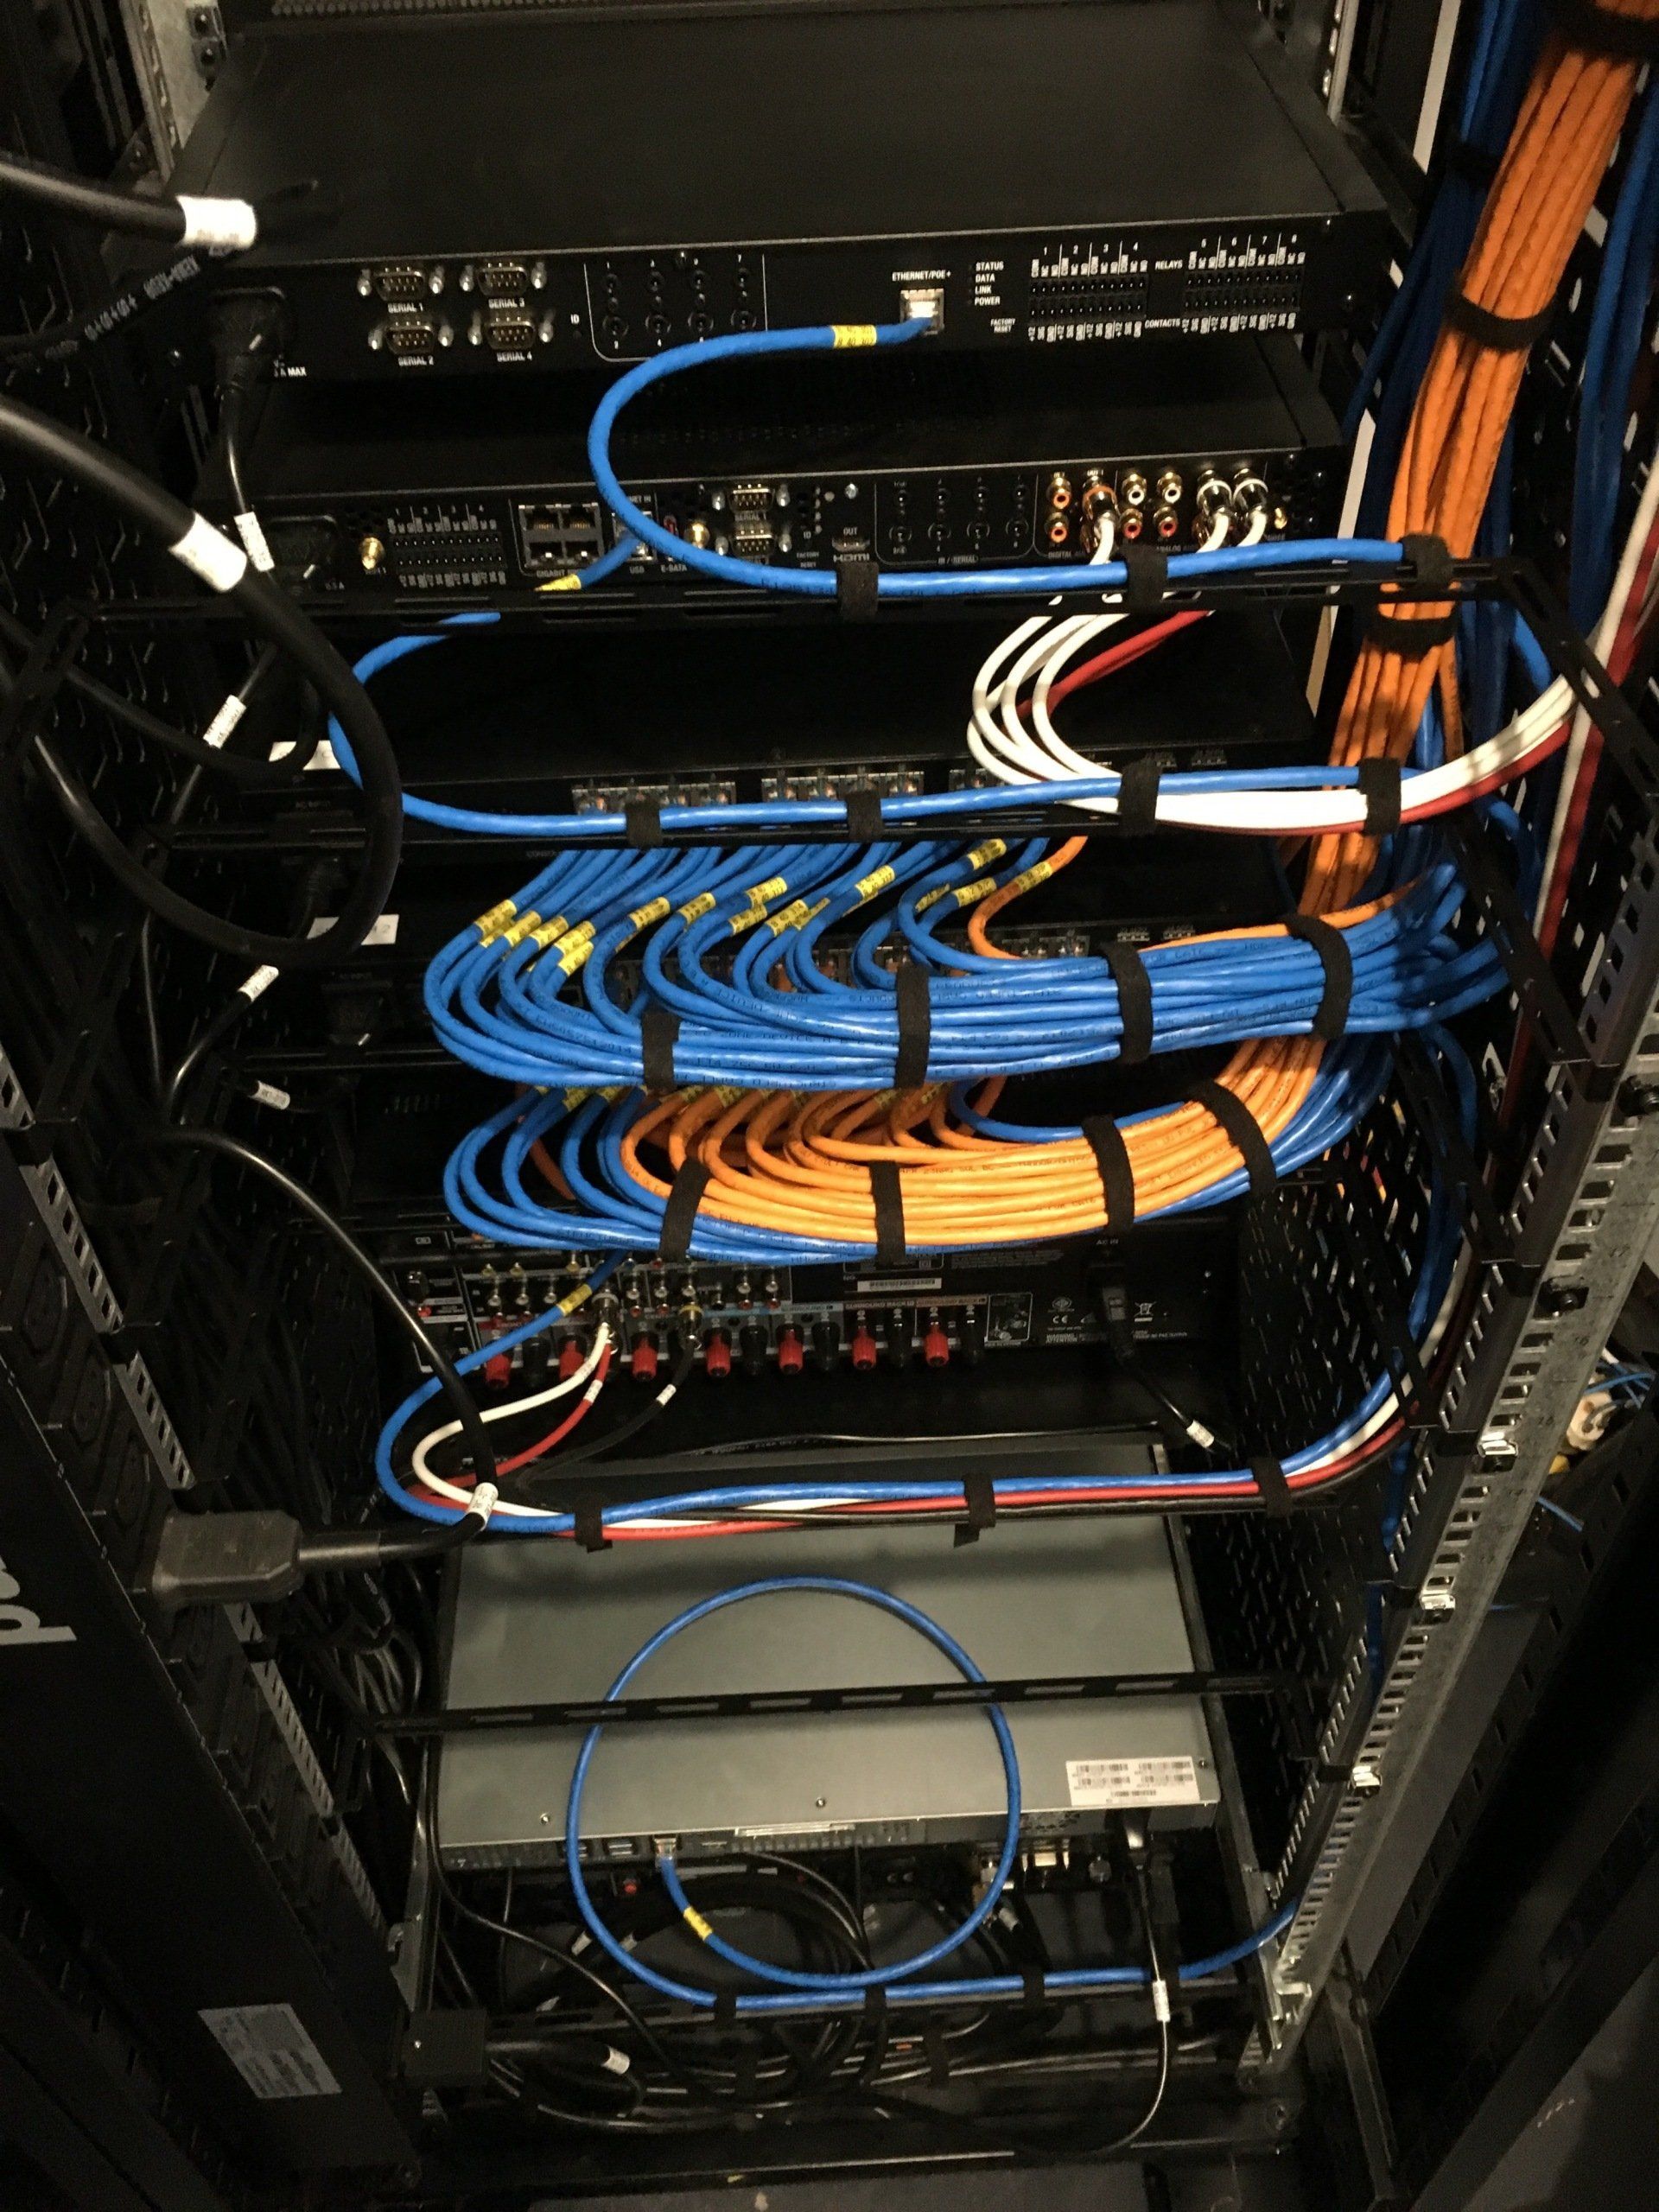 Photograph of lacing of category 6A cables in the control rack